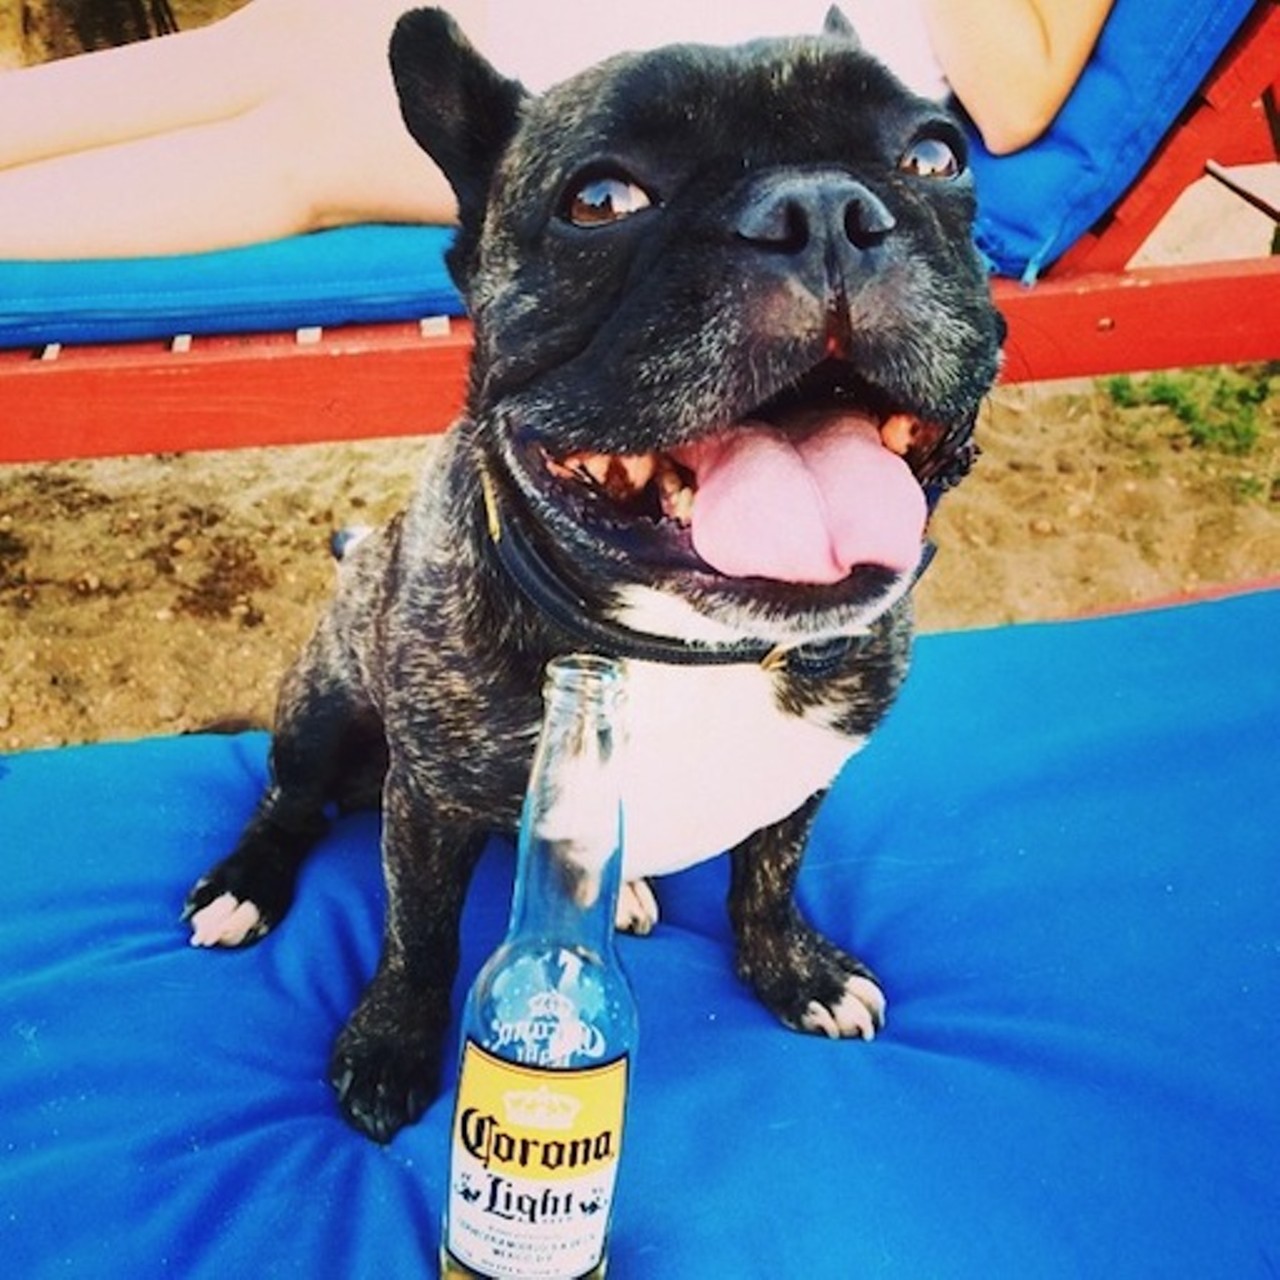 Grab a drink with your dog on any of Cleveland's dog-friendly patios. Sample craft brews in Tremont at Edison's Pub (2373 Professor Ave), or participate in yappy hours every third Tuesday of the month at Tremont Taphouse (2572 Scranton Rd), the proceeds of which help local dog rescues.